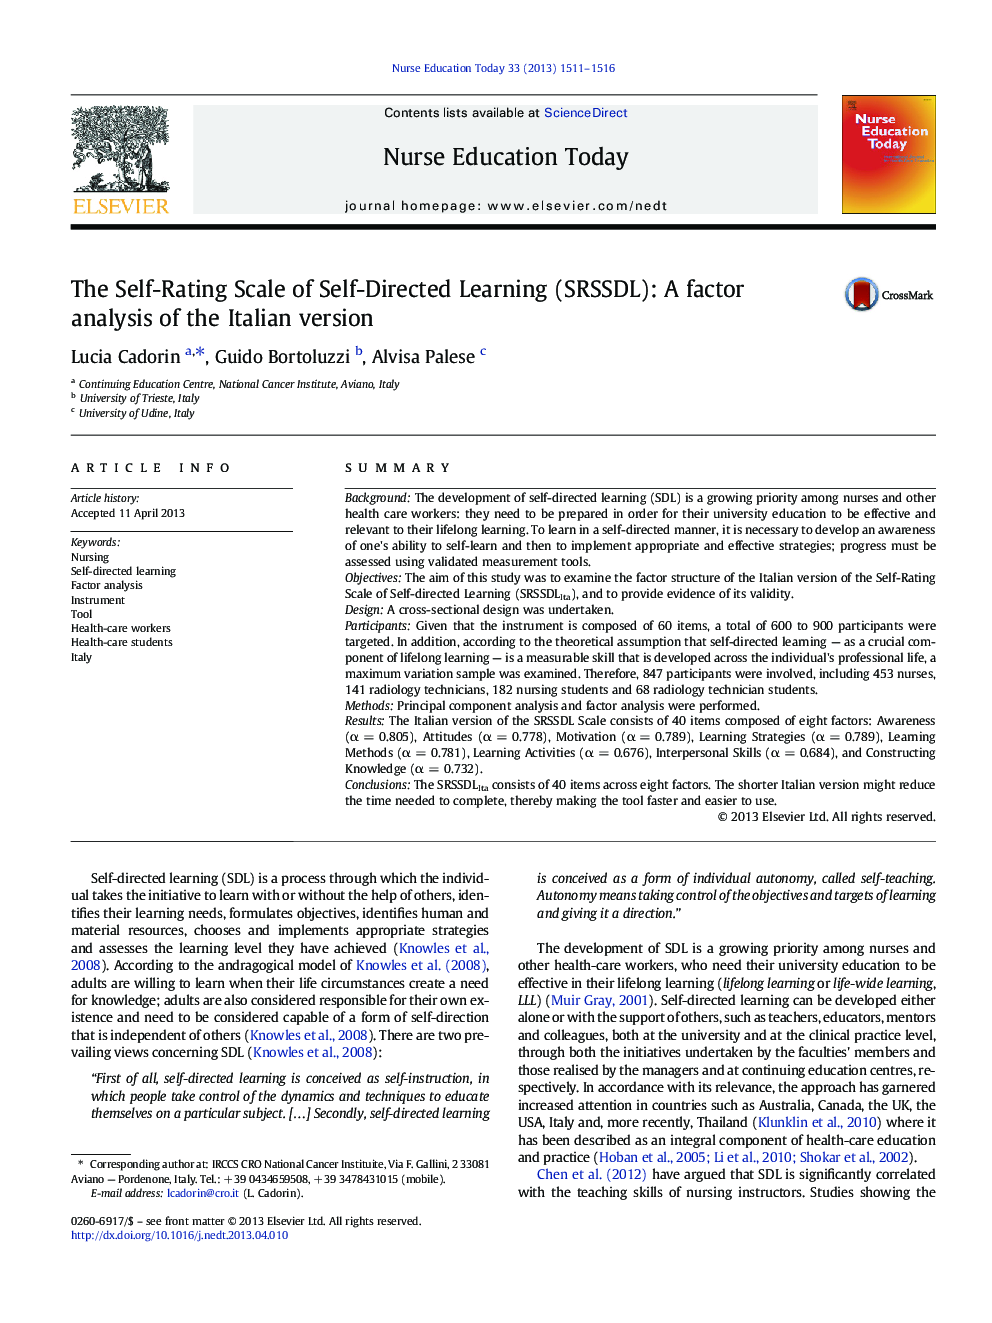 The Self-Rating Scale of Self-Directed Learning (SRSSDL): A factor analysis of the Italian version